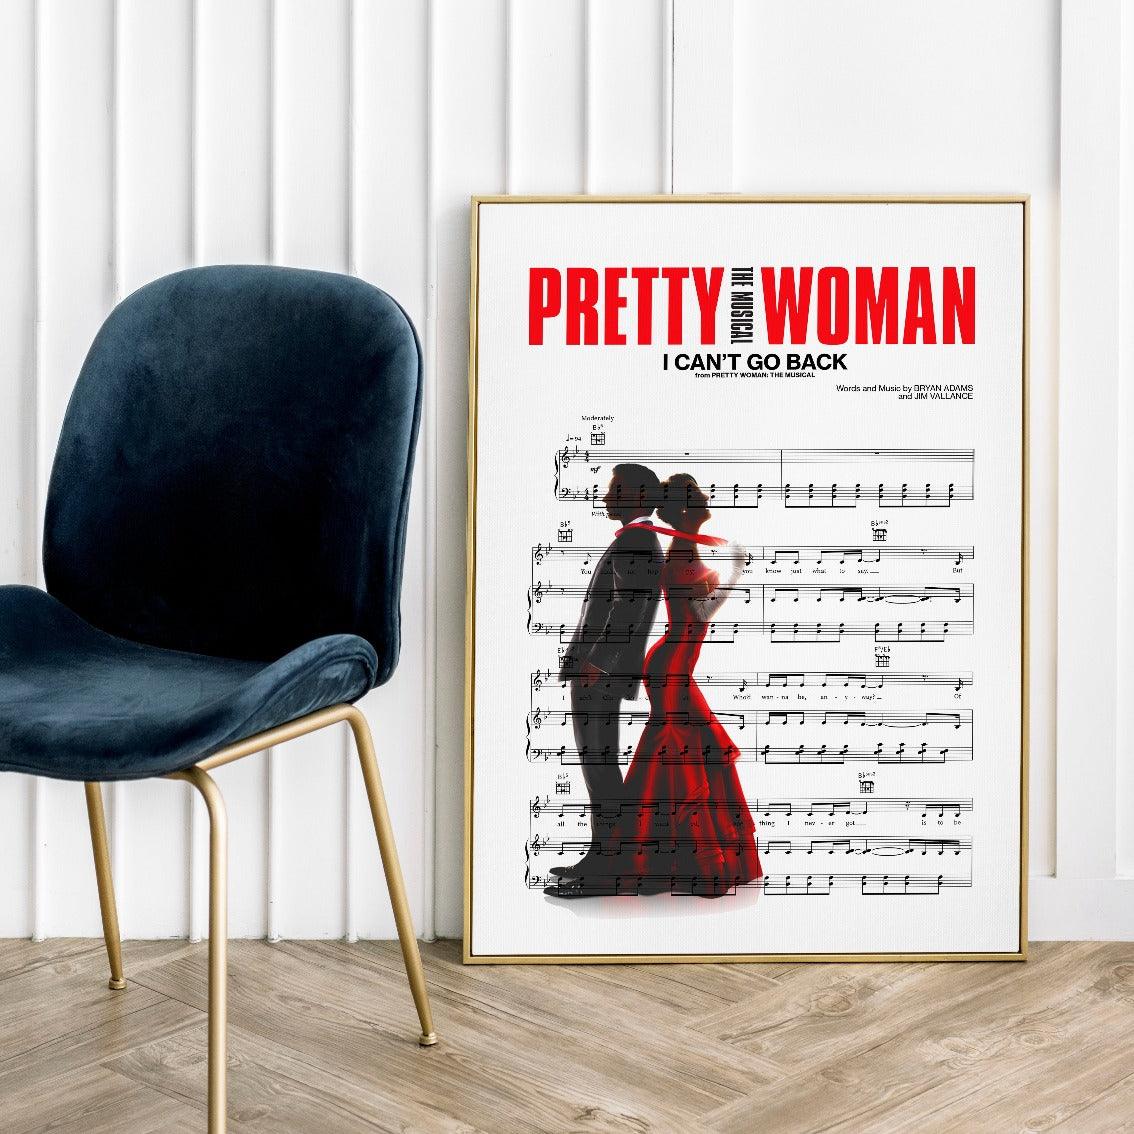 This Pretty Woman - I CAN'T GO BACK Poster is a must-have for any music lover. With its great quality printing and simple design, it's perfect for hanging in your kitchen or dining room. Plus, it makes a great gift for any occasion. And with free fast delivery, you can't go wrong.